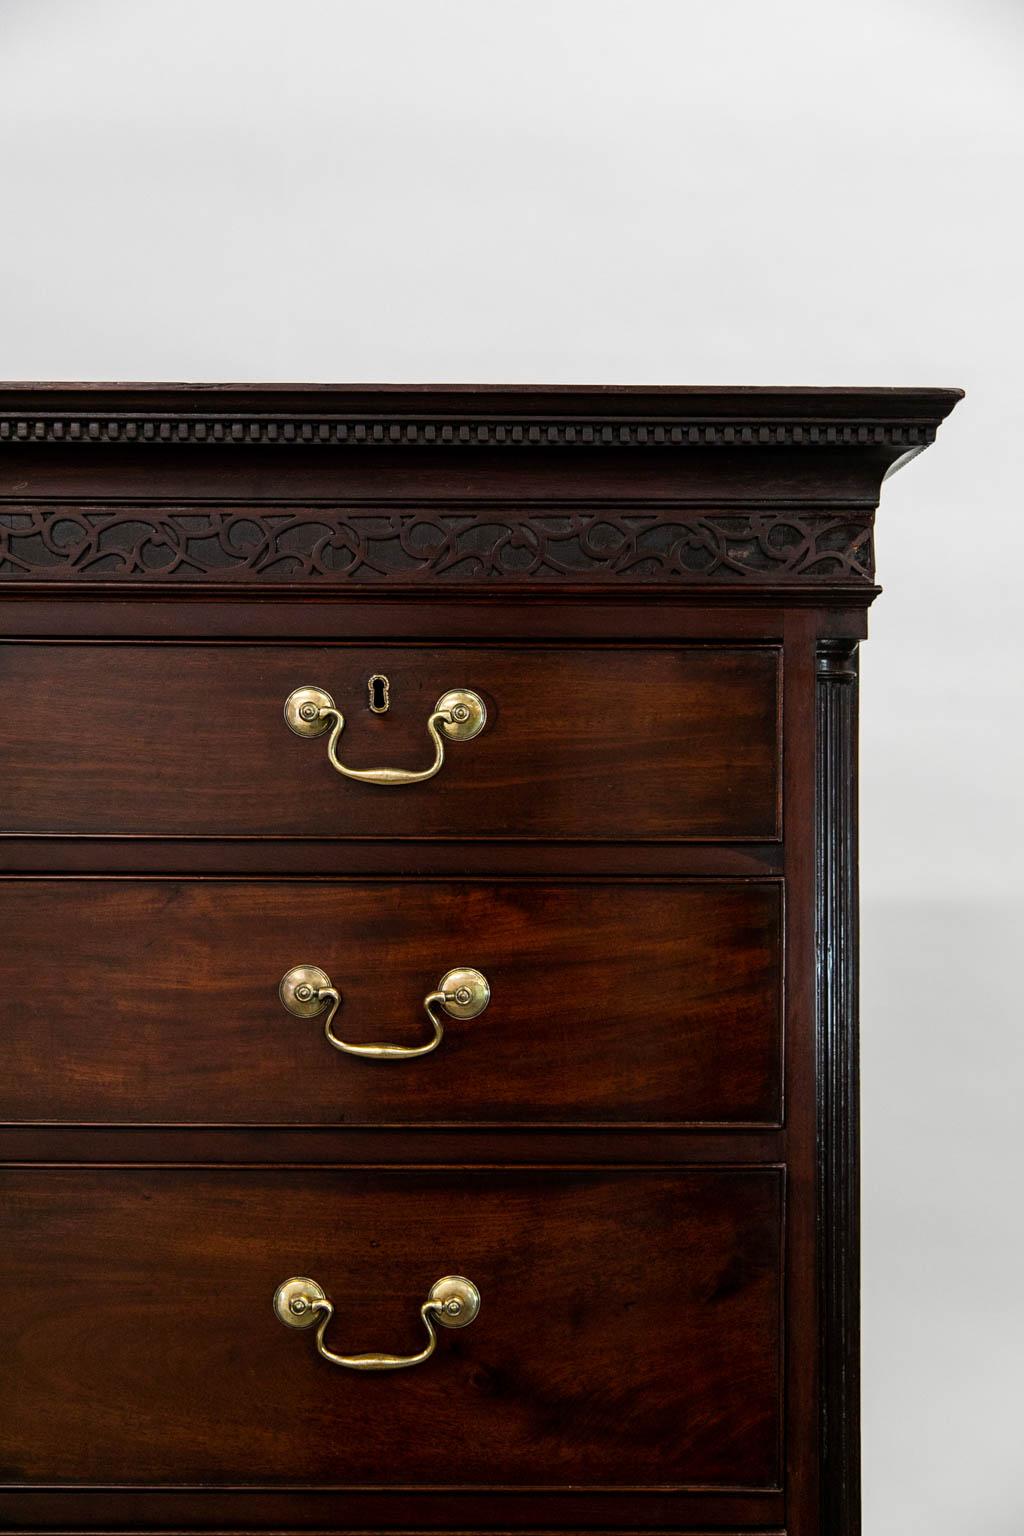 The cornice of this chest on chest has a diminutive dentil and egg and dart cornice with blind fretwork that extends on all three sides. The top section has a fluted quarter column with a blind fretwork plinth base. There are shrinkage separations